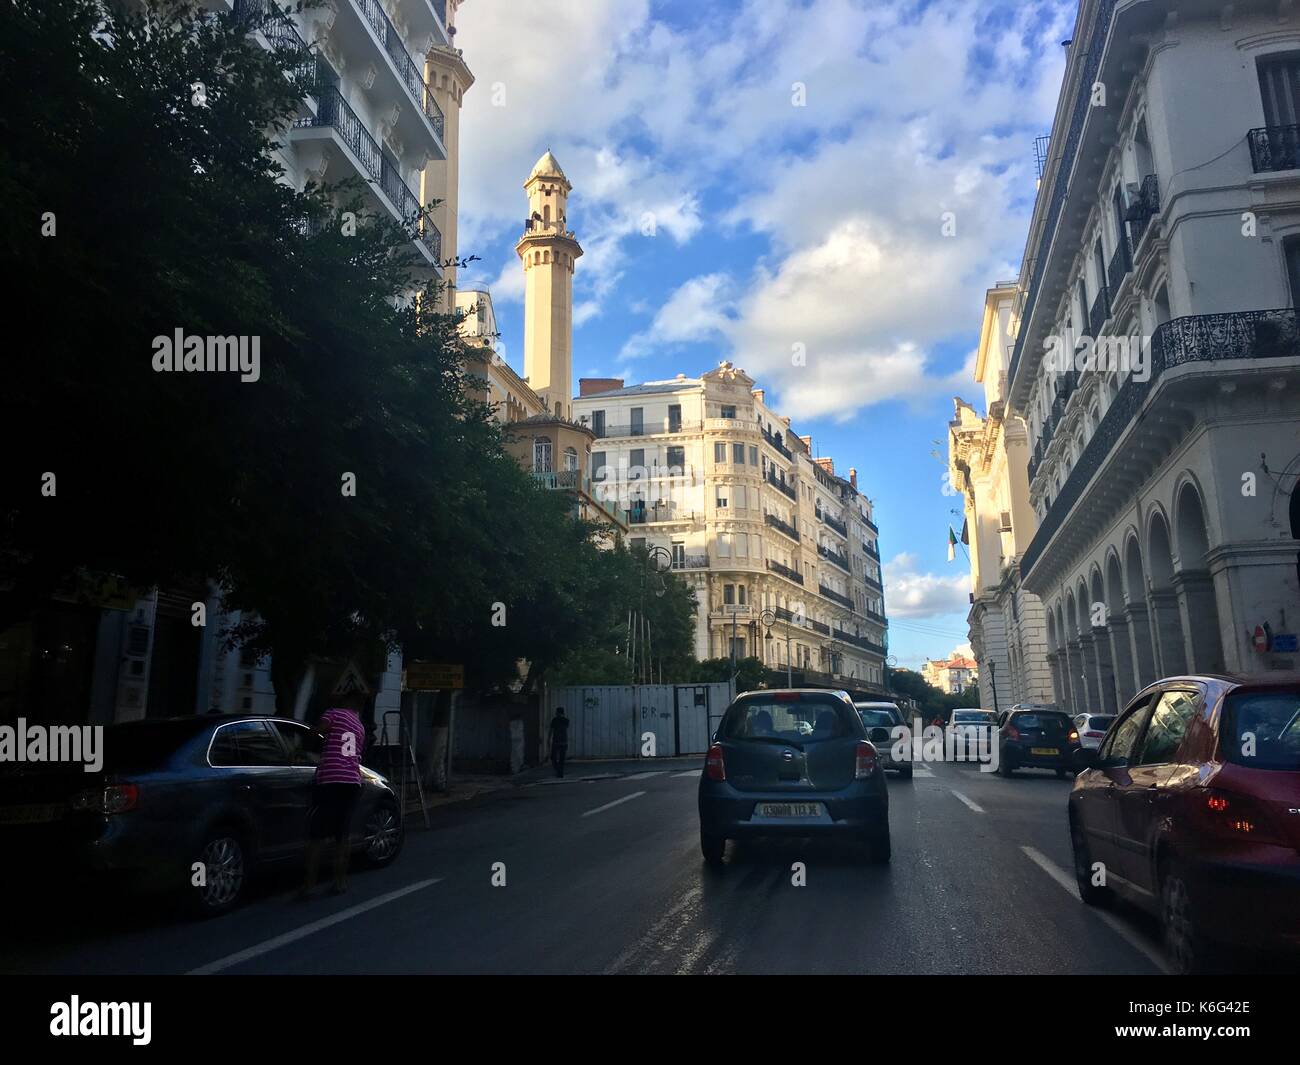 ALGIERS, ALGERIA - SEPTEMBER 15, 2017: French colonial side of the city of Algiers Algeria.Modern city has many old French type buildings. Stock Photo